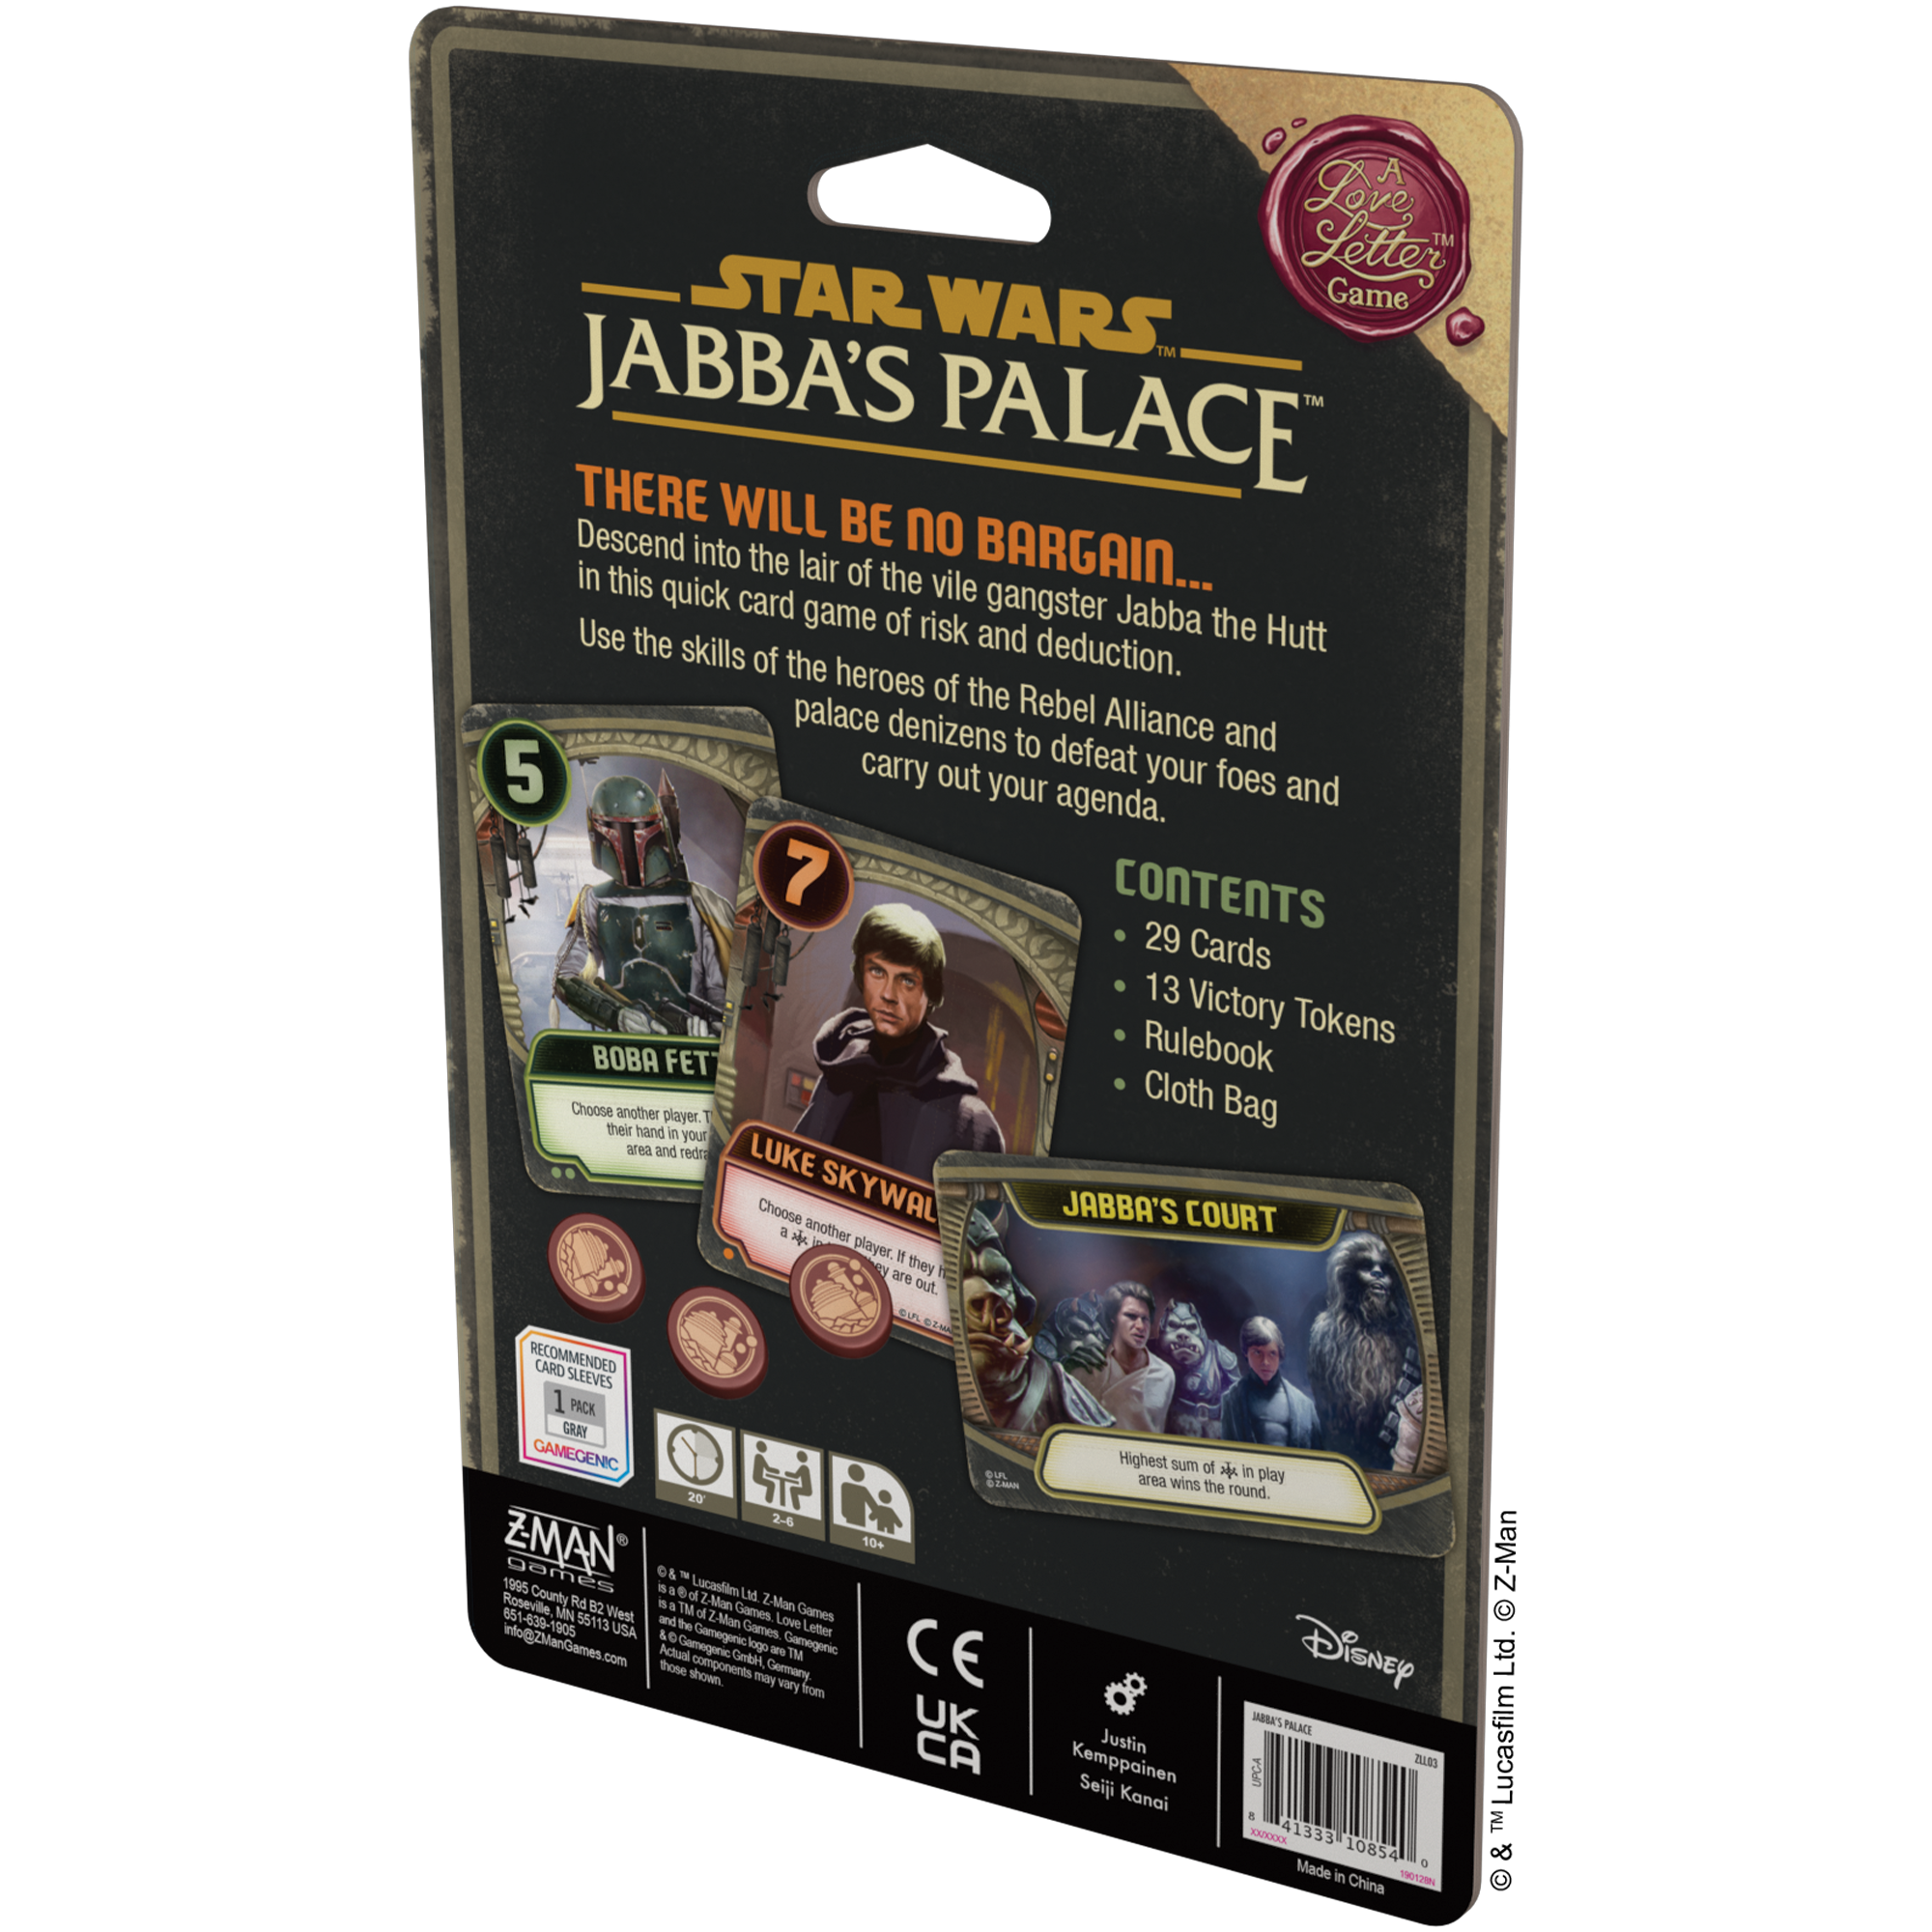 Star Wars Jabba's Palace: A Love Letter Game - Loaded Dice Barry Vale of Glamorgan CF64 3HD